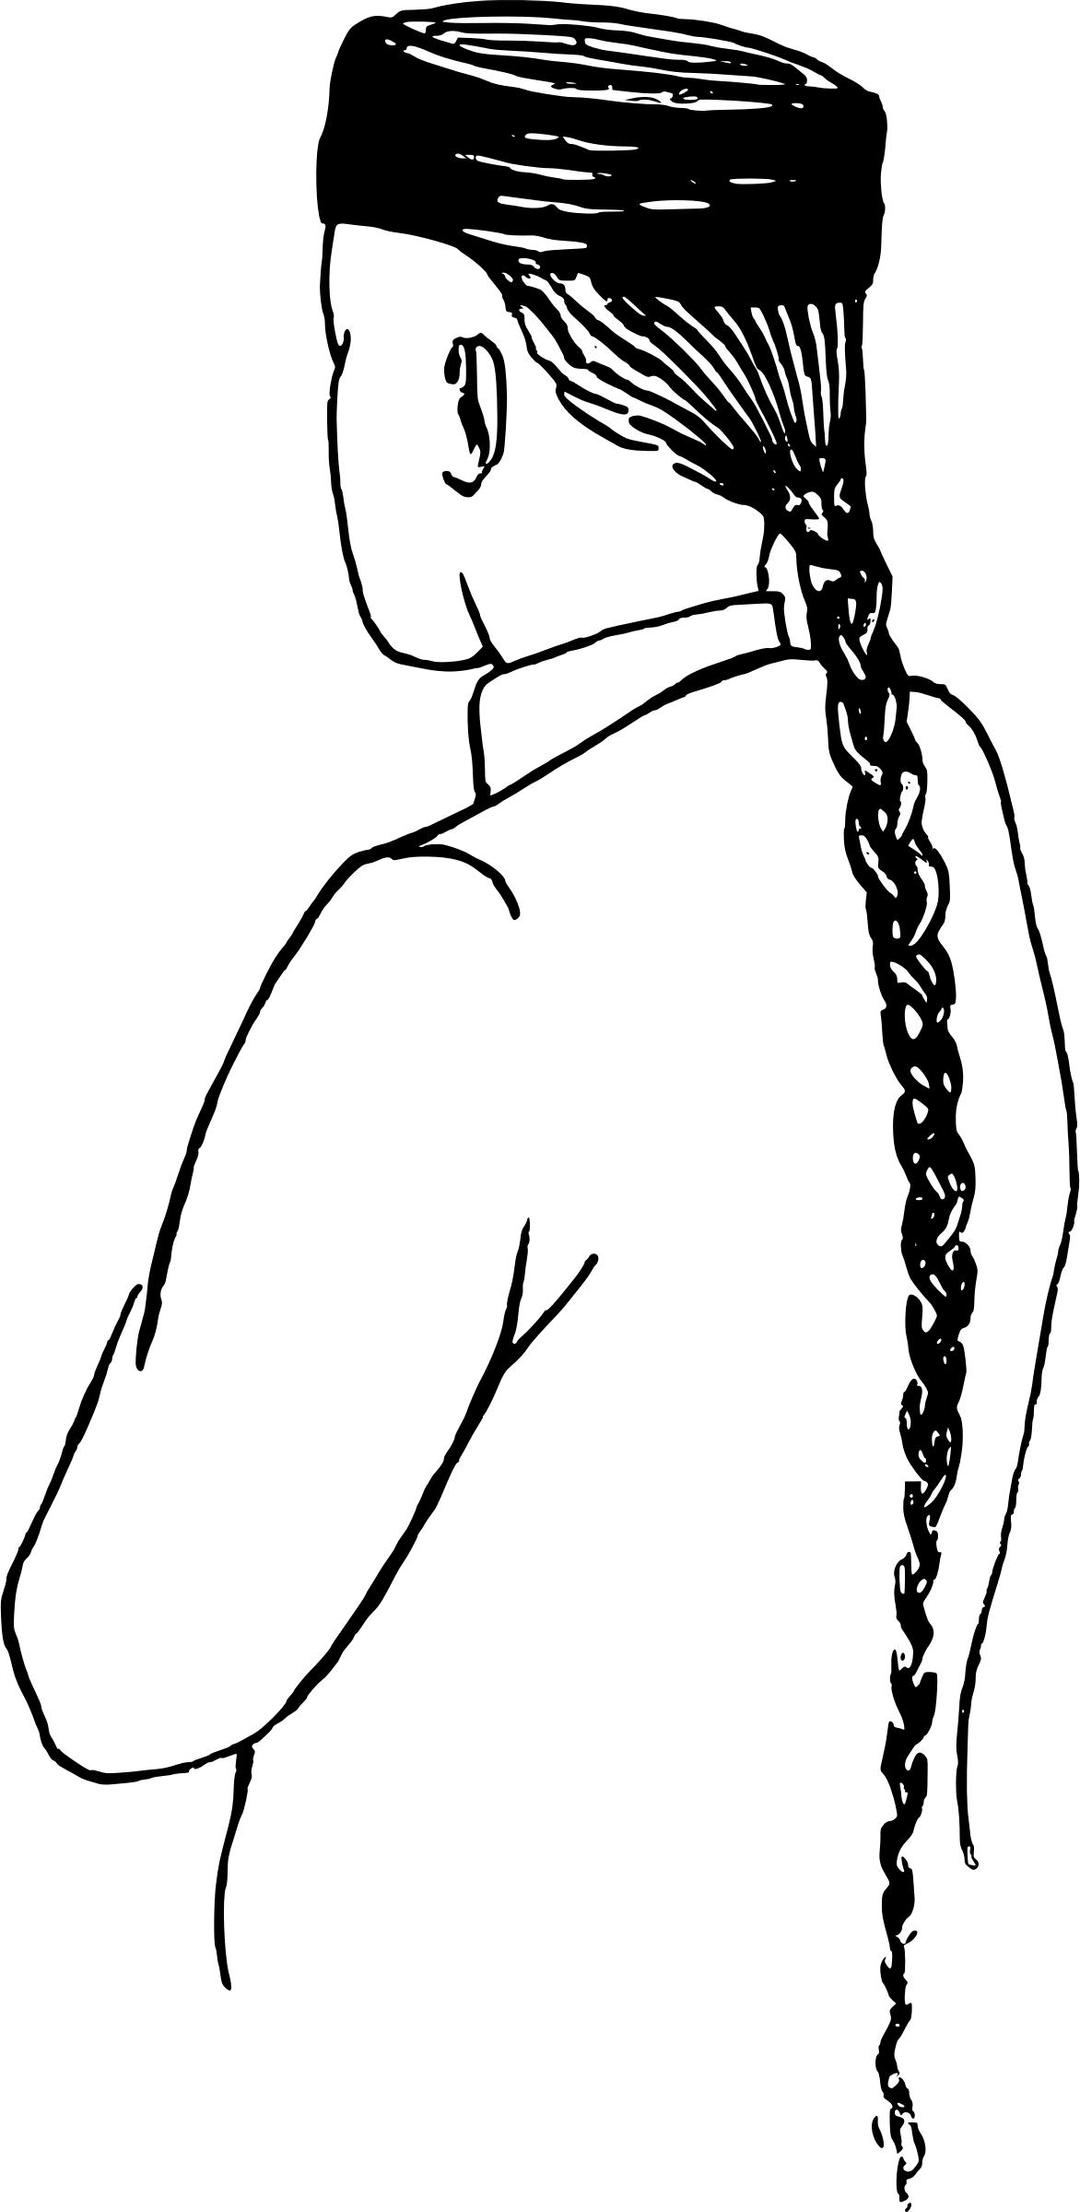 Chinese Ponytail png transparent